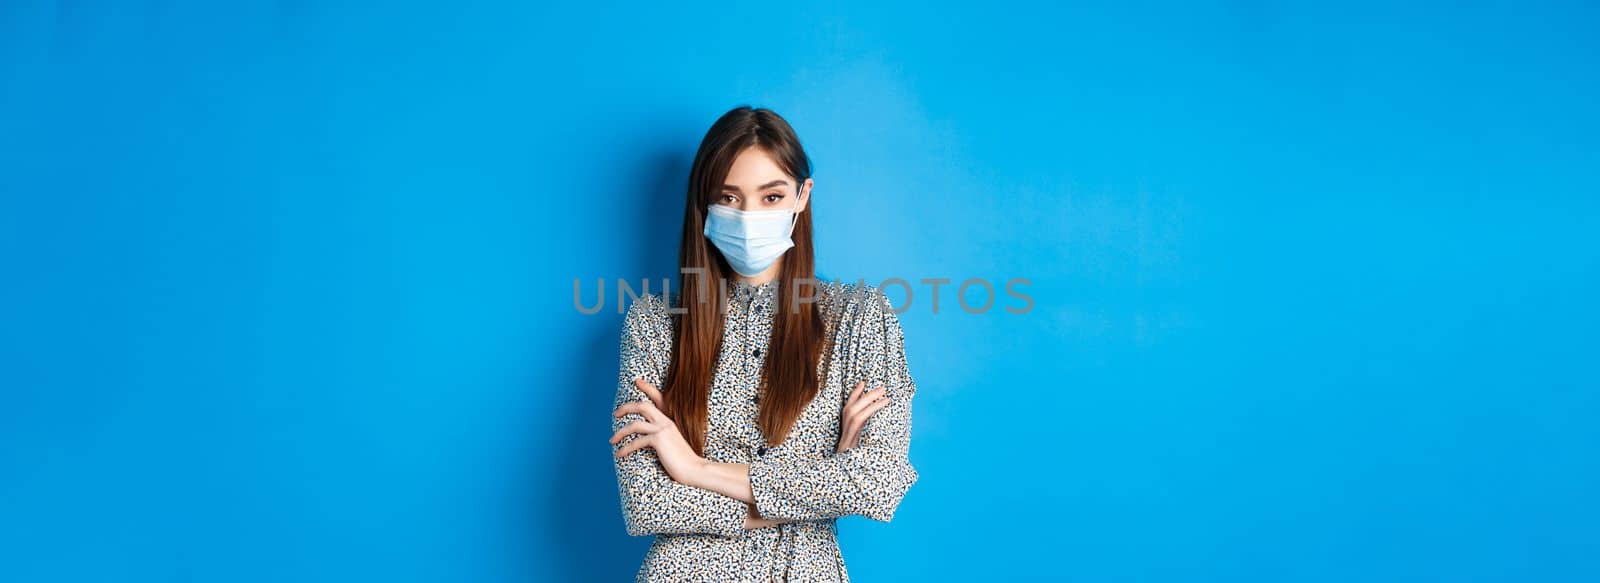 Covid-19, pandemic lifestyle concept. Serious young woman with long natural hair, wearing medical mask, cross arms on chest, protect herself from virus, blue background.